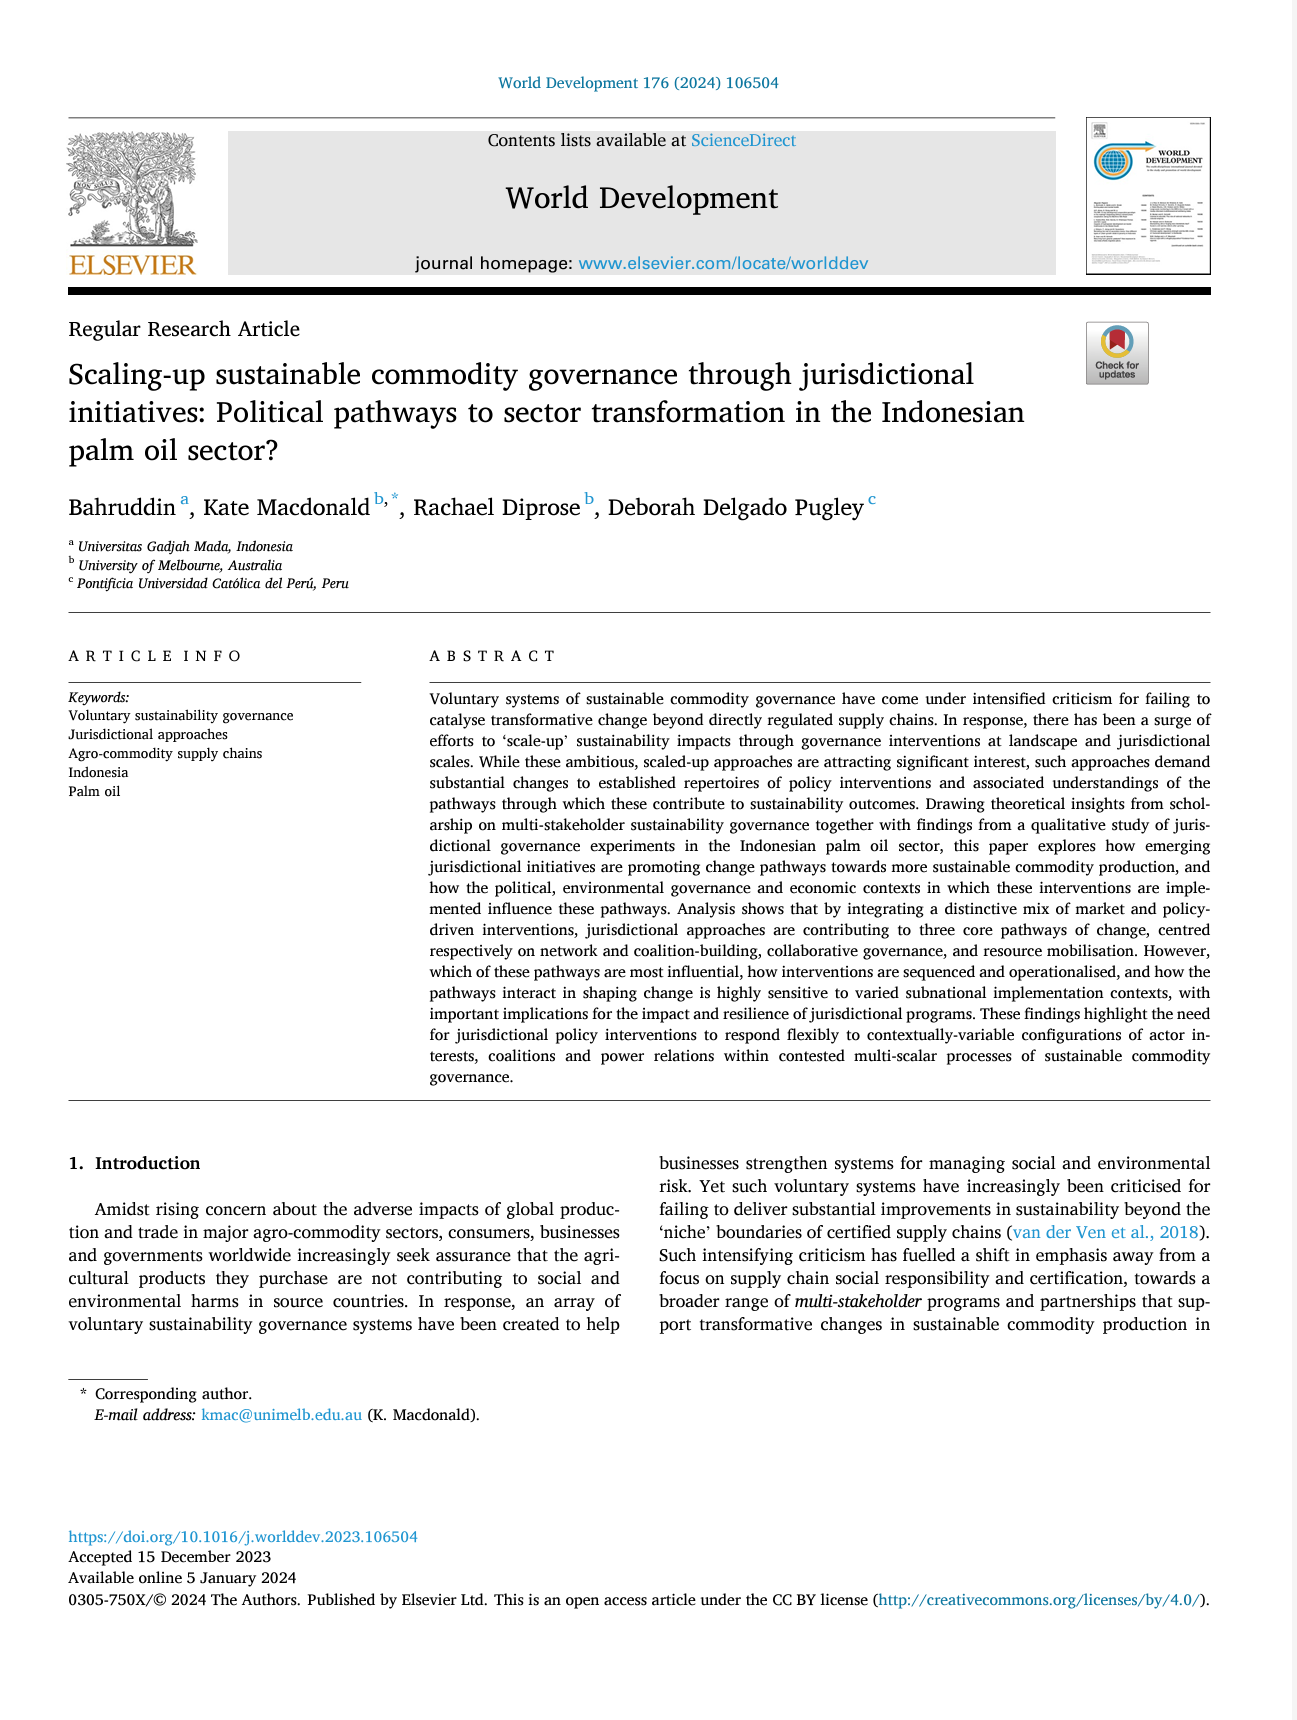 Scaling-up Sustainable Commodity Governance Through Jurisdictional Initiatives: Political Pathways to Sector Transformation in the Indonesian Palm Oil Sector